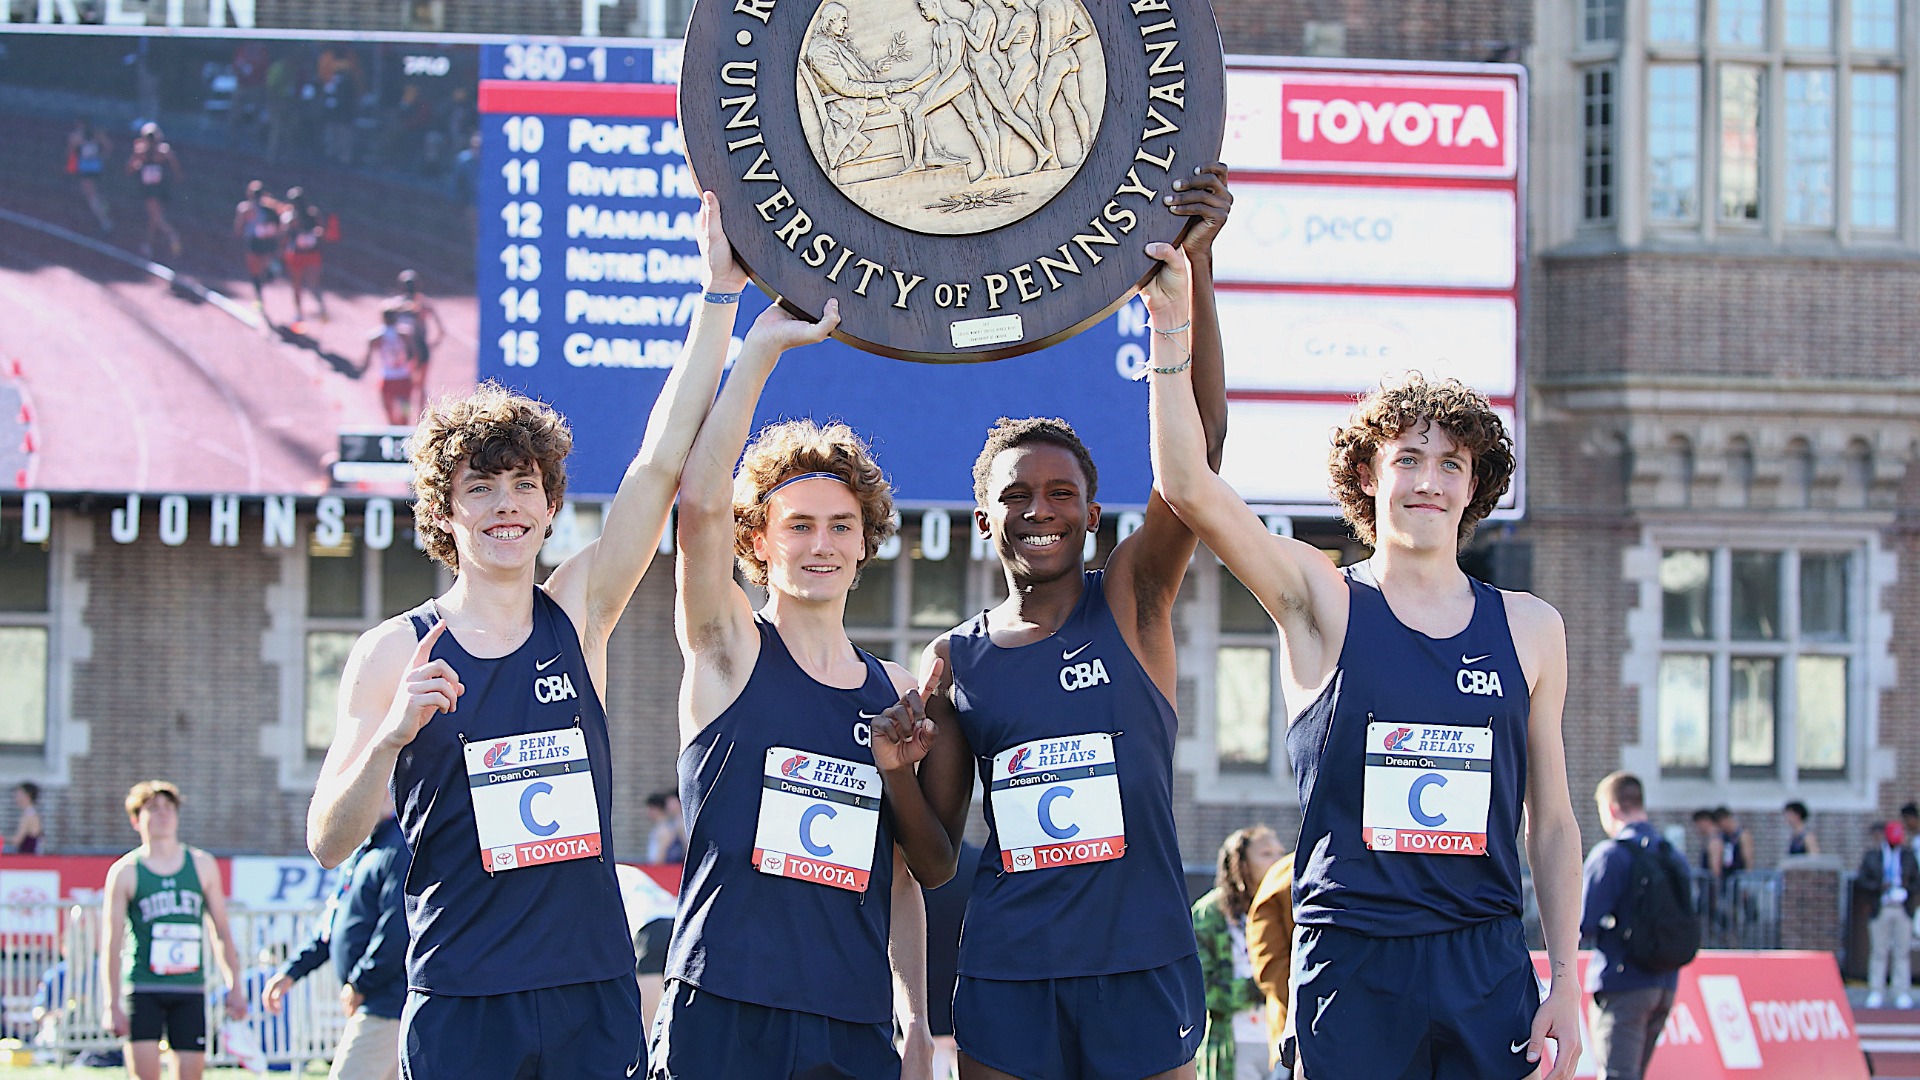 Slide 3 - DISTANCE MEDLEY RELAY SQUAD WINS CBA'S FOURTH PENN RELAYS TITLE